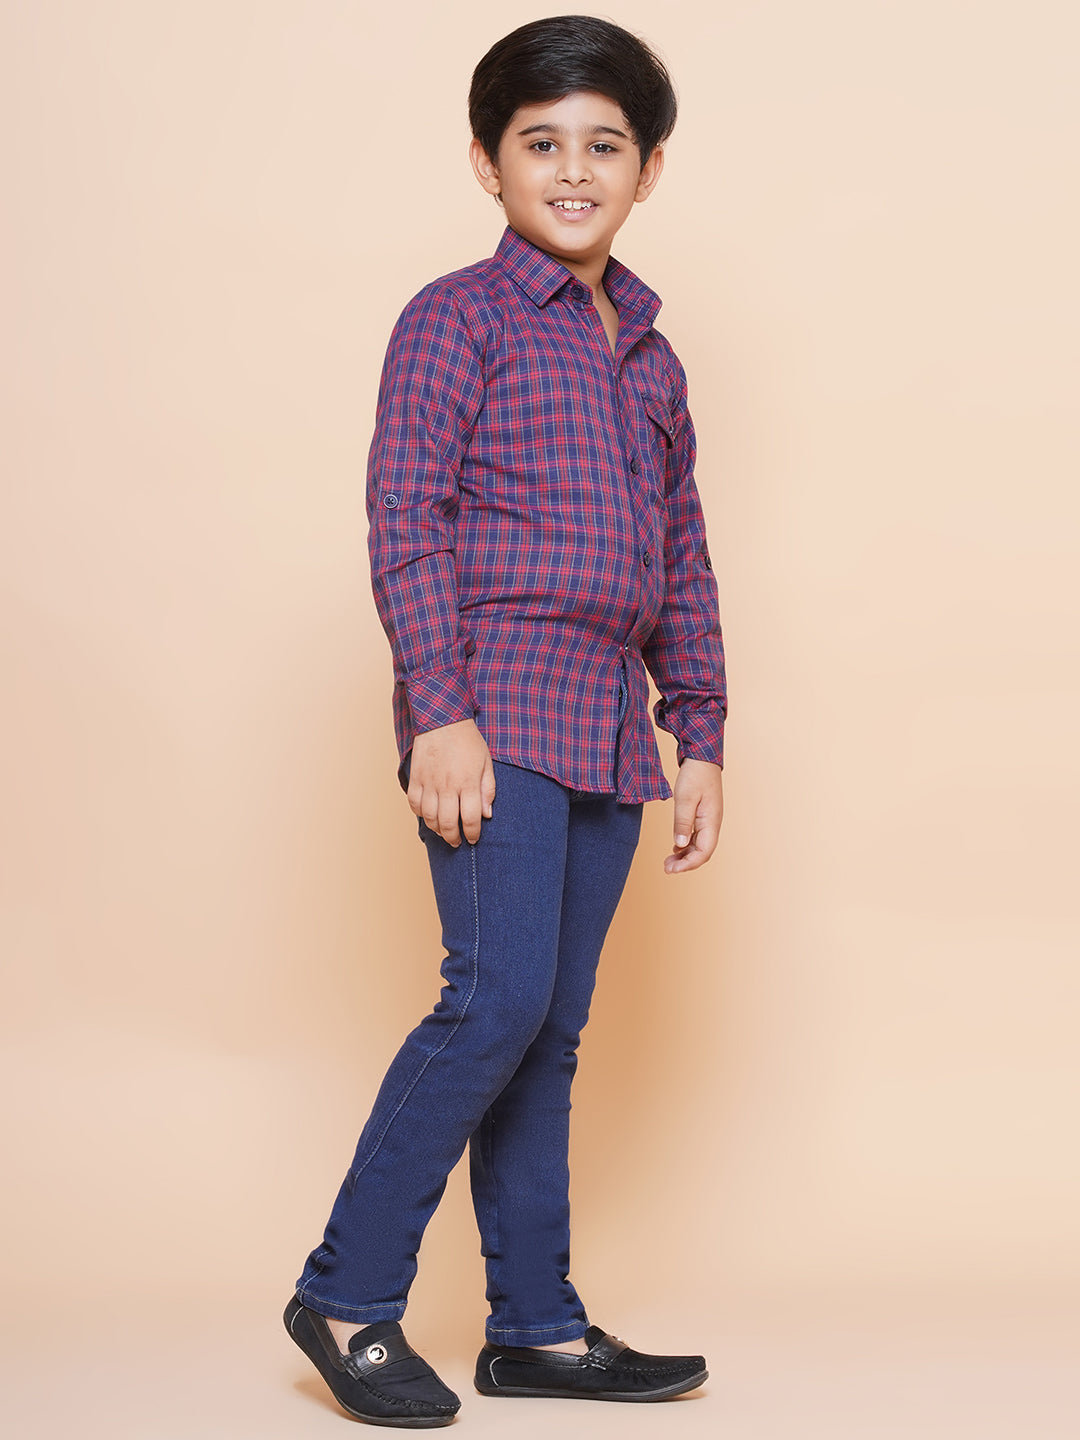 Kids Red Shirt and Jeans Clothing Set For Boys